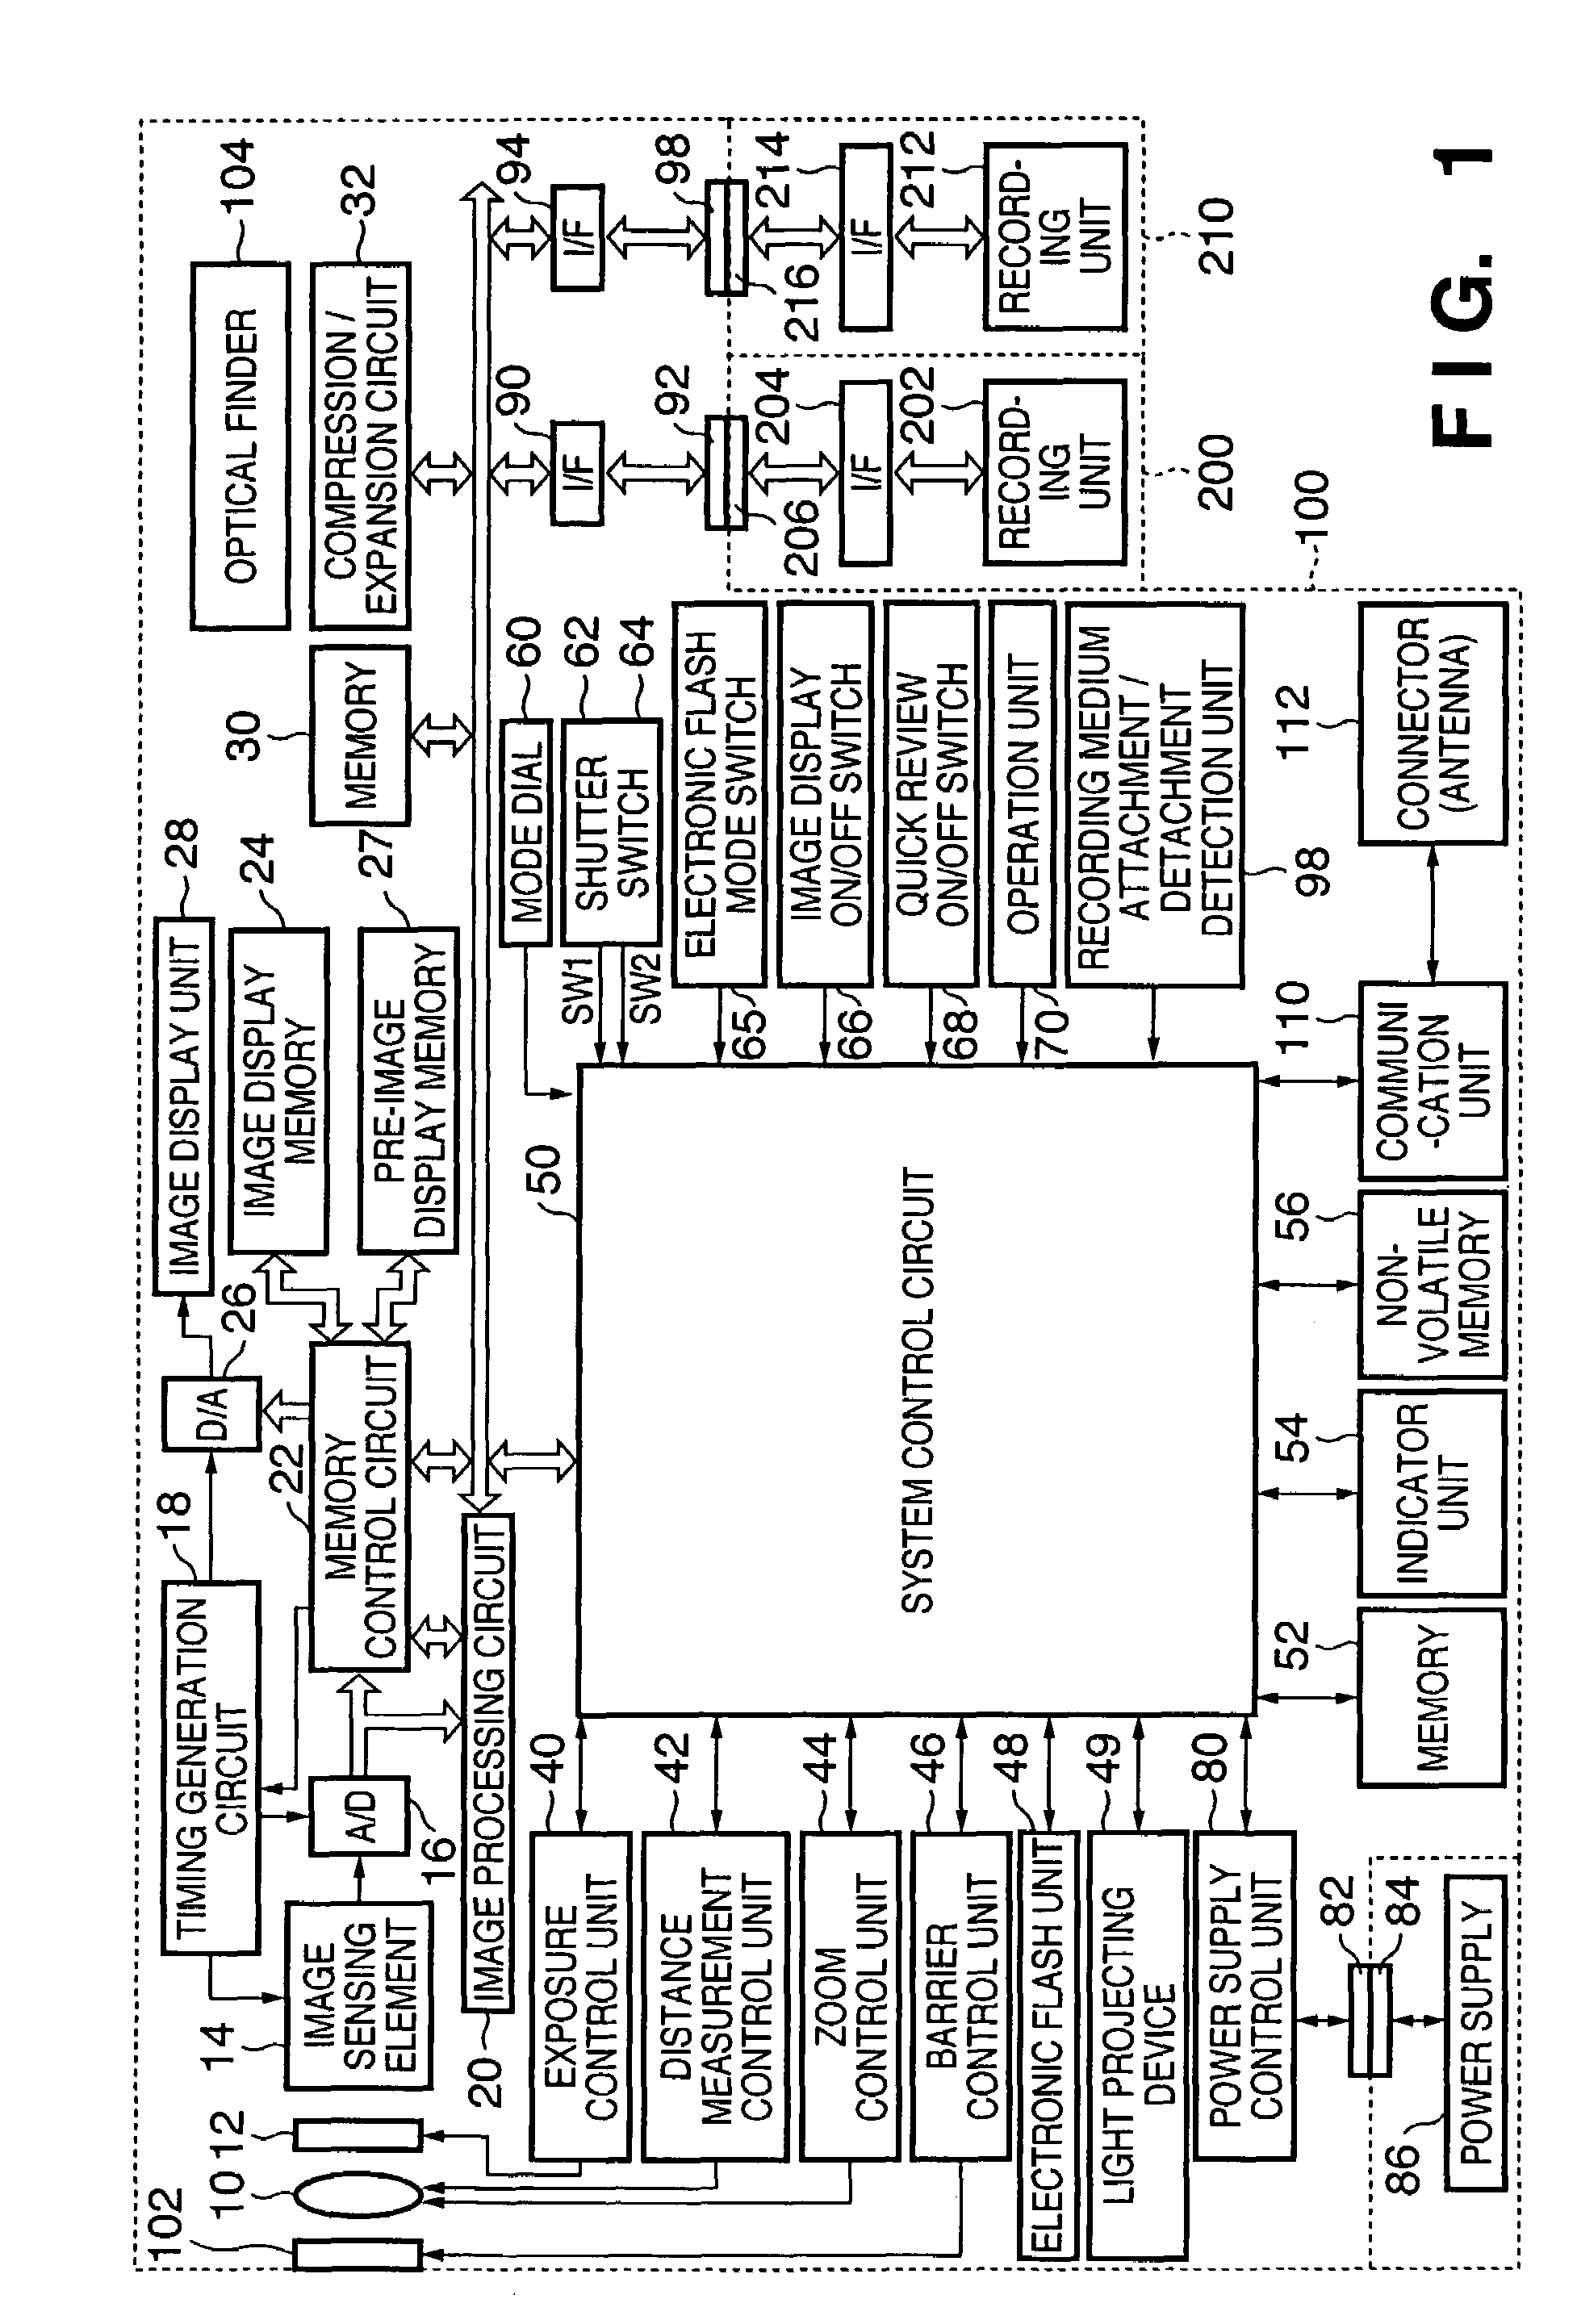 Image sensing apparatus, image processing apparatus, and control method therefor for relaxing a red-eye effect